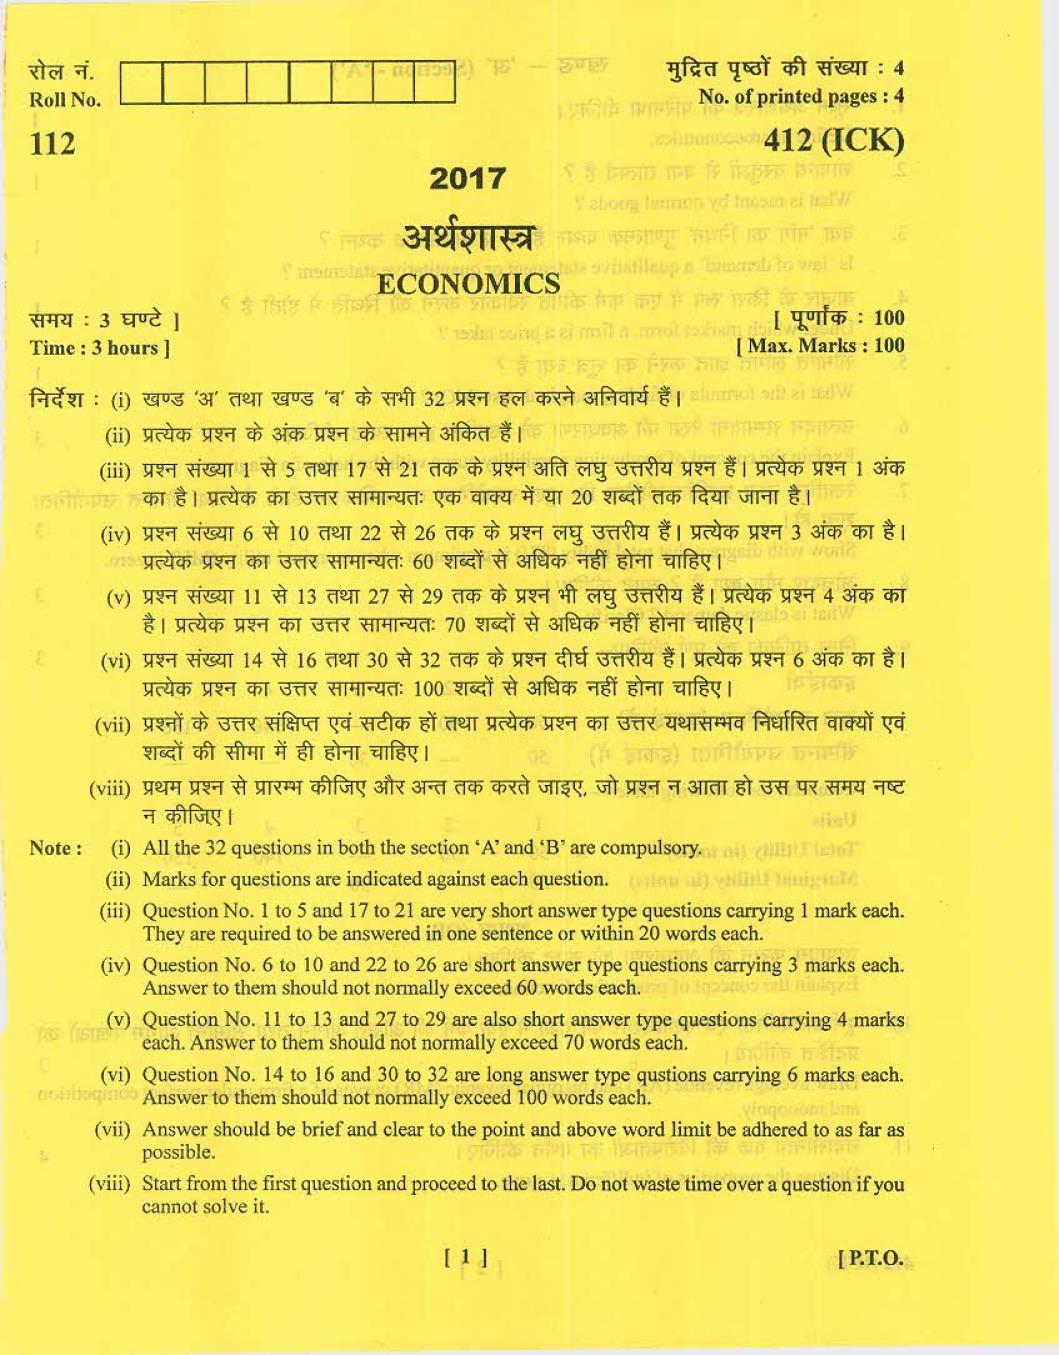 Uttarakhand Board Class 12 Question Paper 2017 for Economics - Page 1